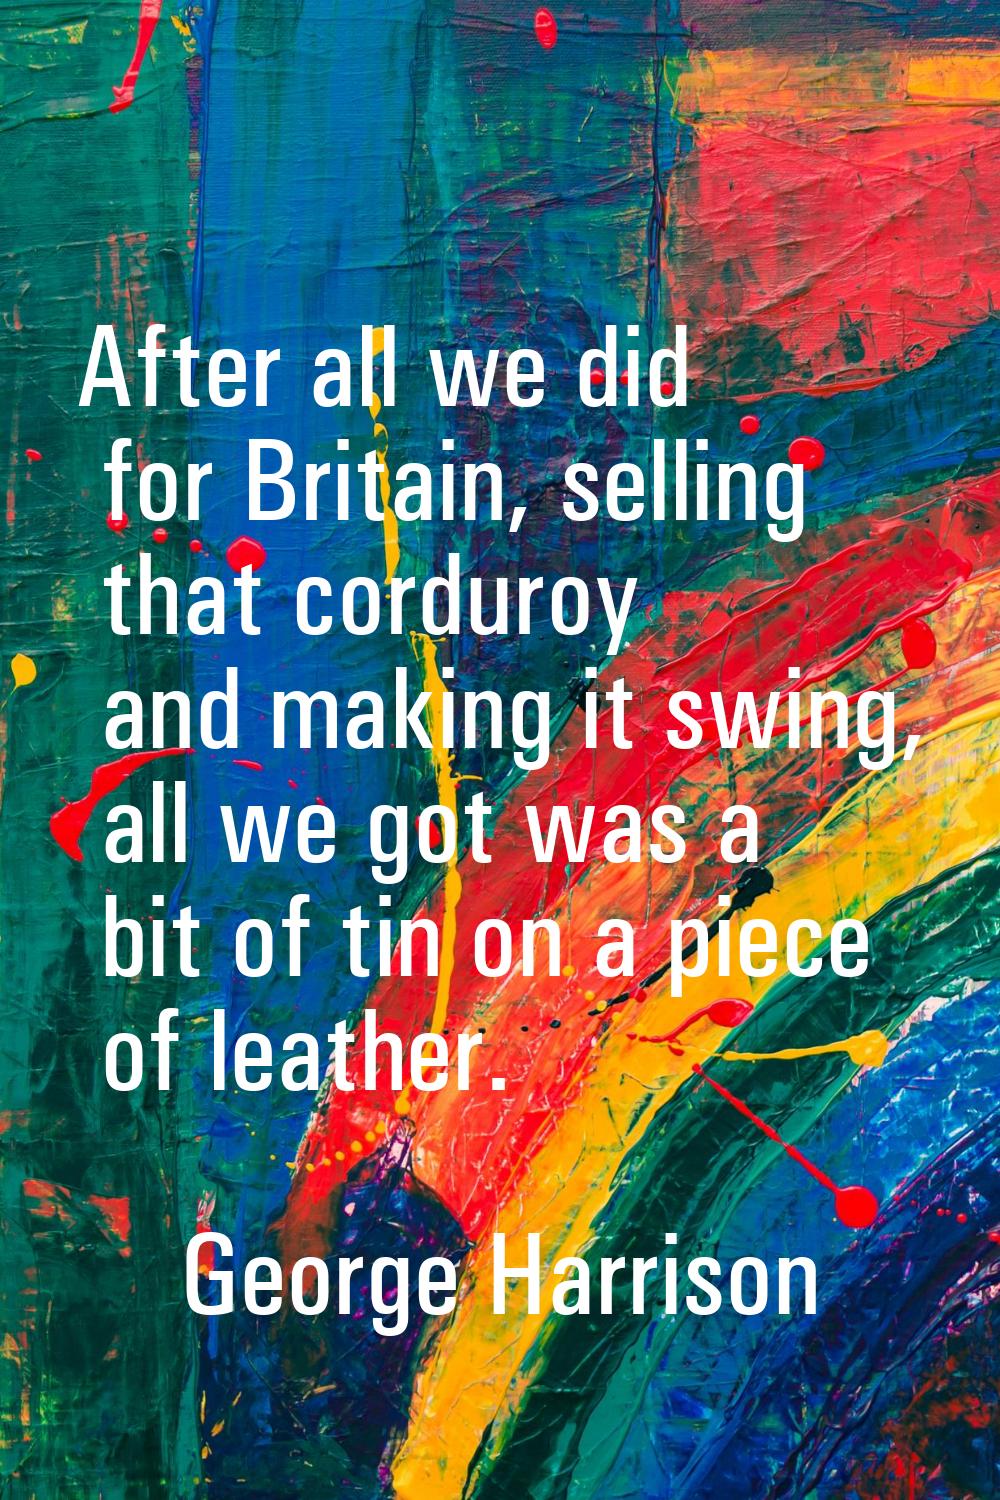 After all we did for Britain, selling that corduroy and making it swing, all we got was a bit of ti